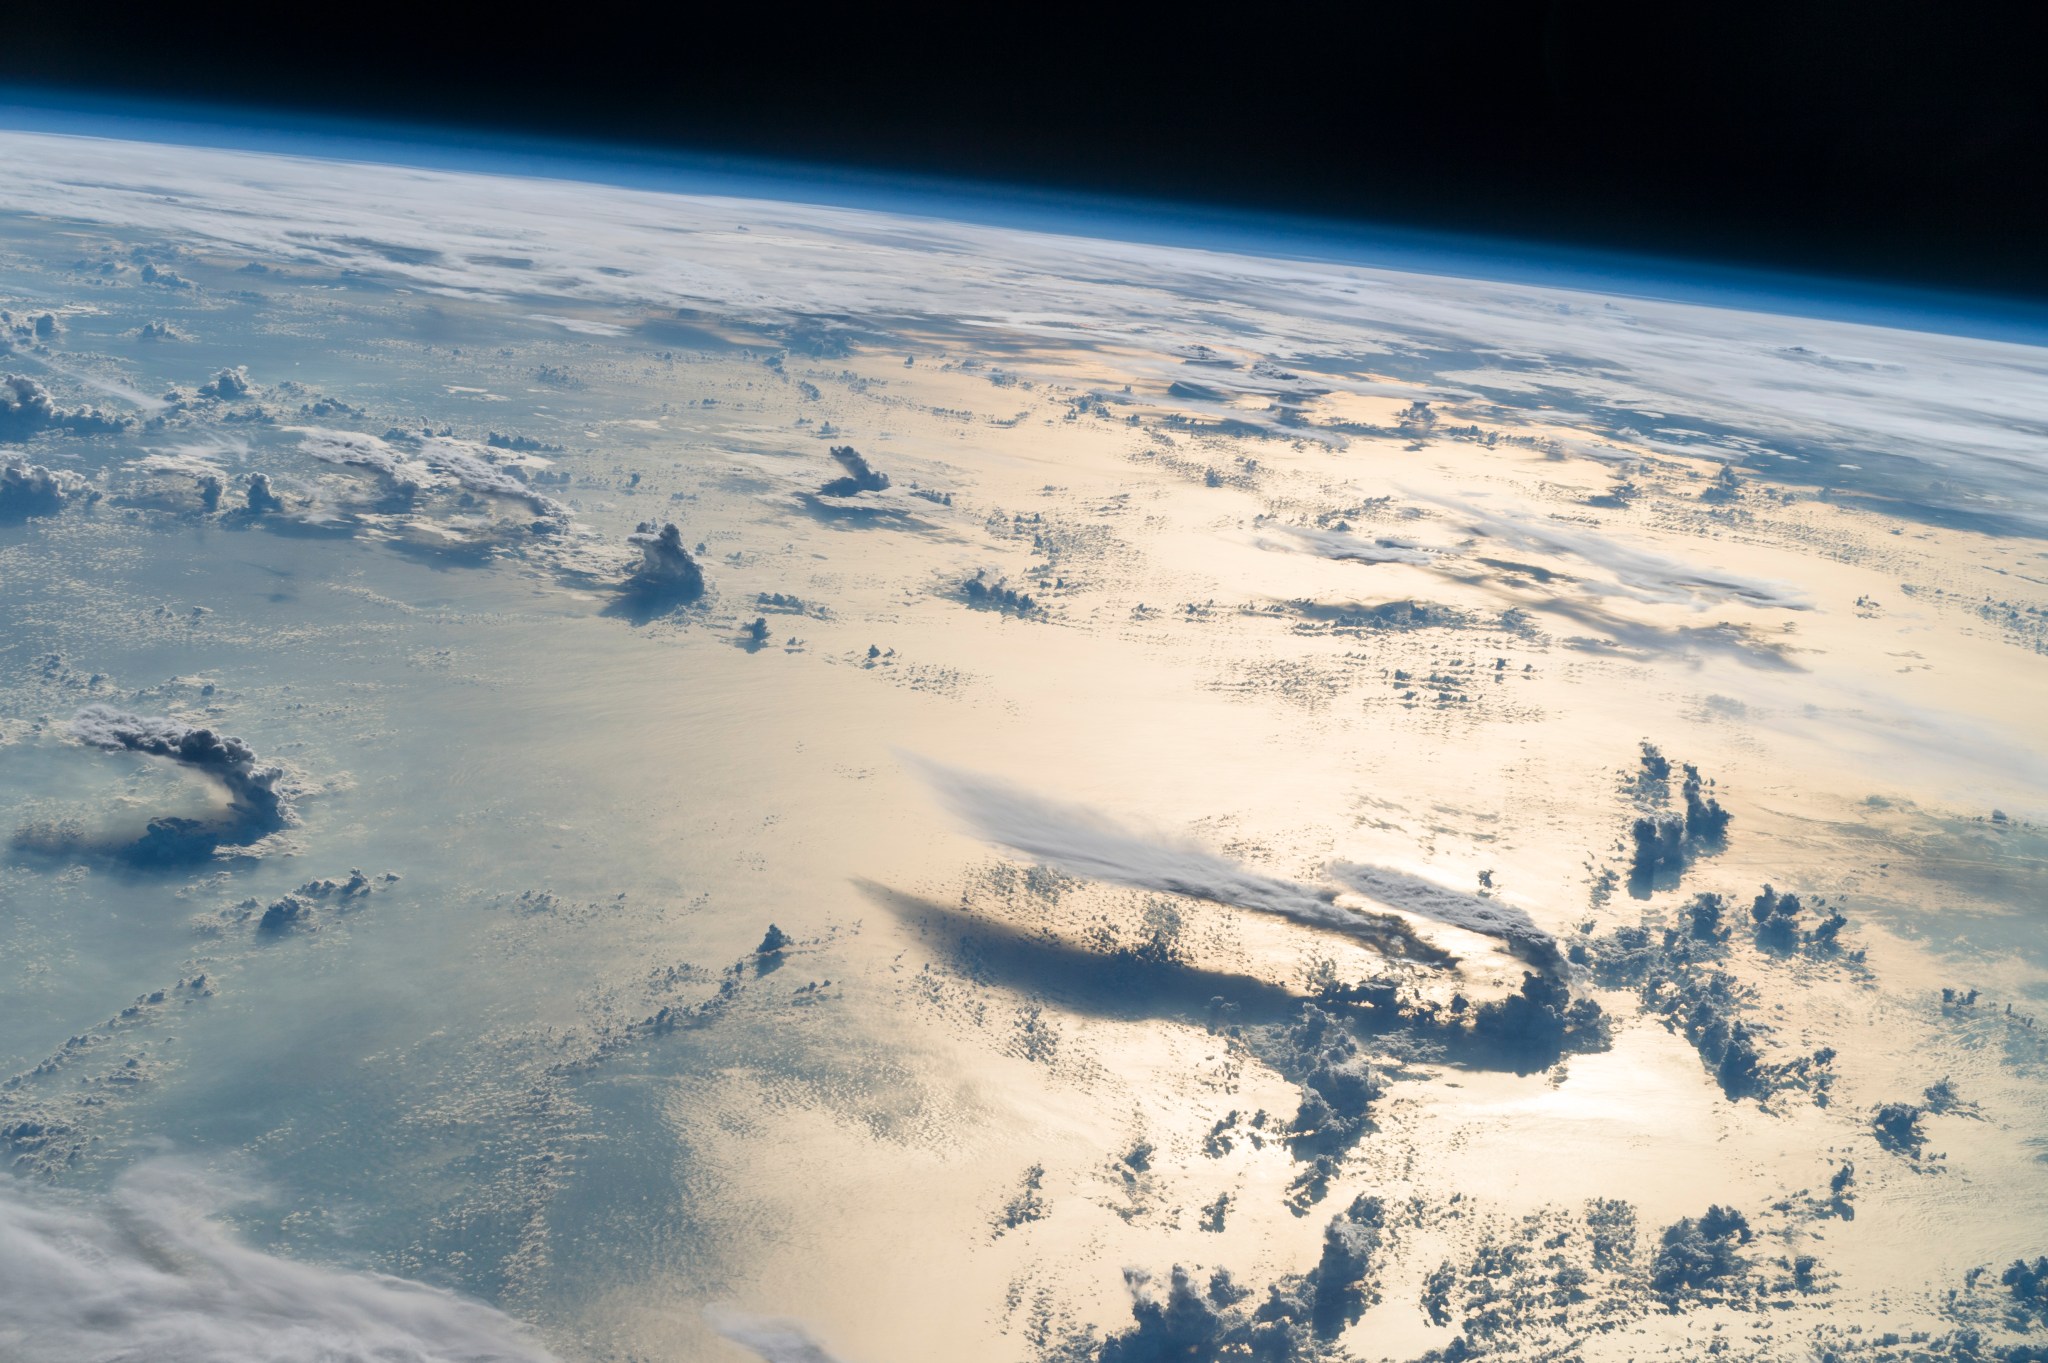 An astronaut image of clouds casting their shadows on Earth's oceans.